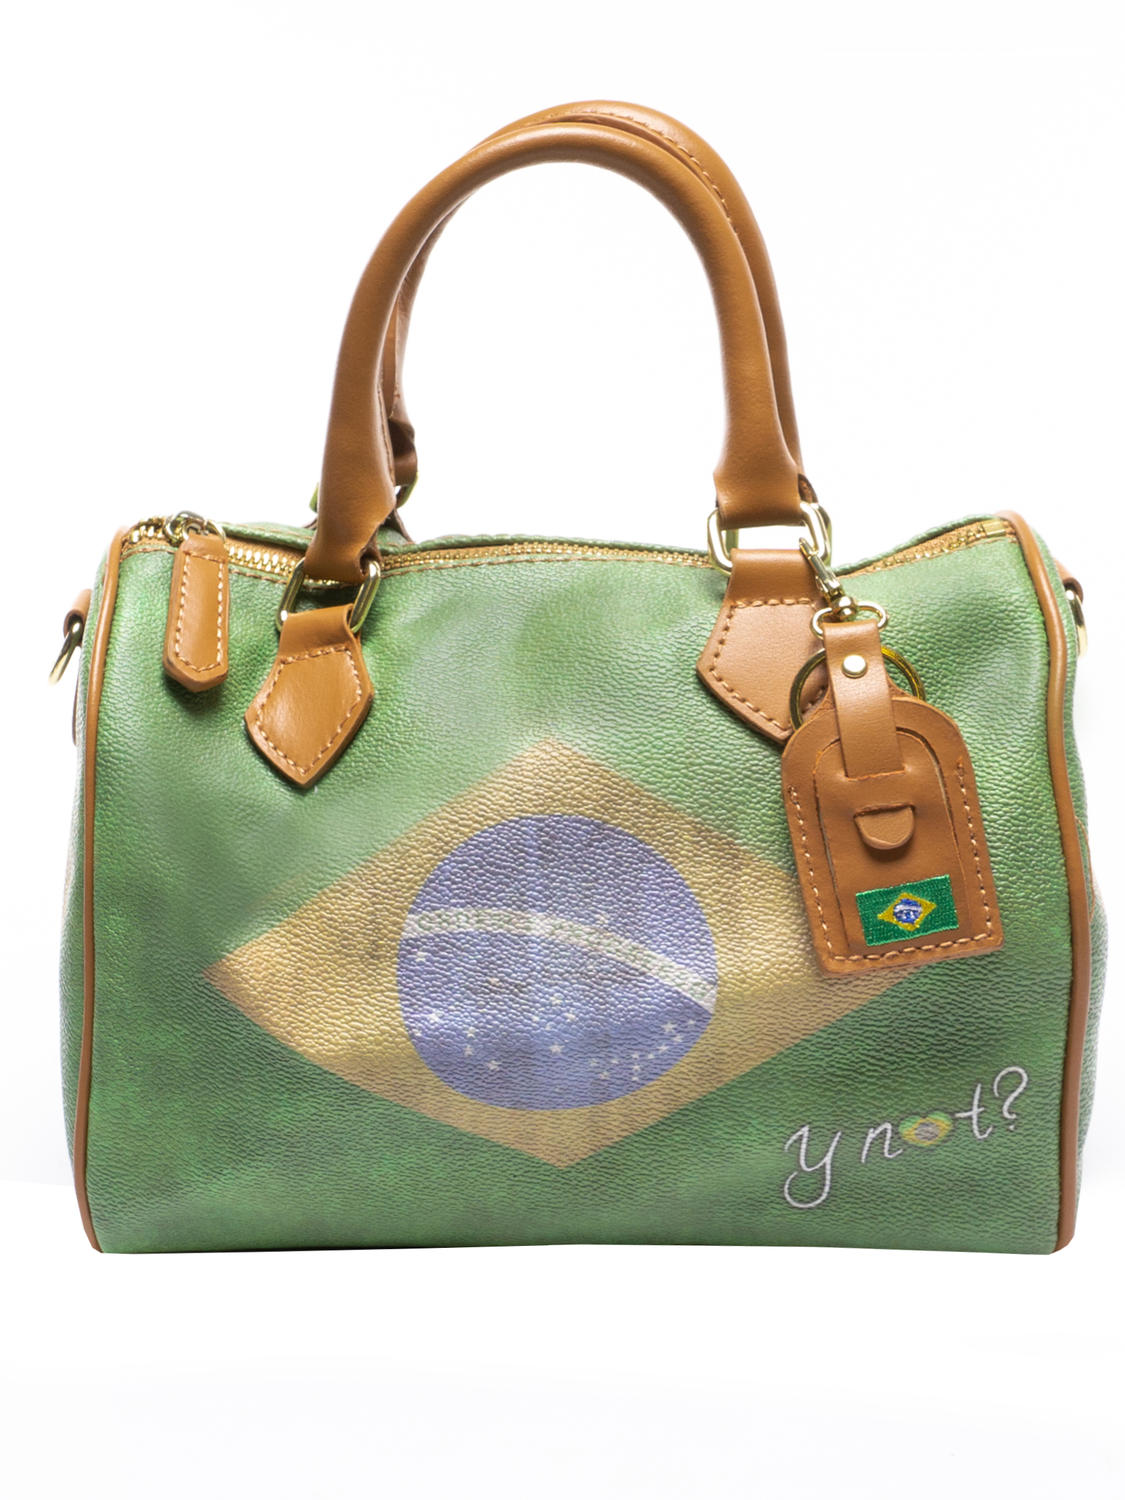 Ynot Yesbag Bauletto Con Tracolla Brasile - Acquista A Prezzi Outlet!